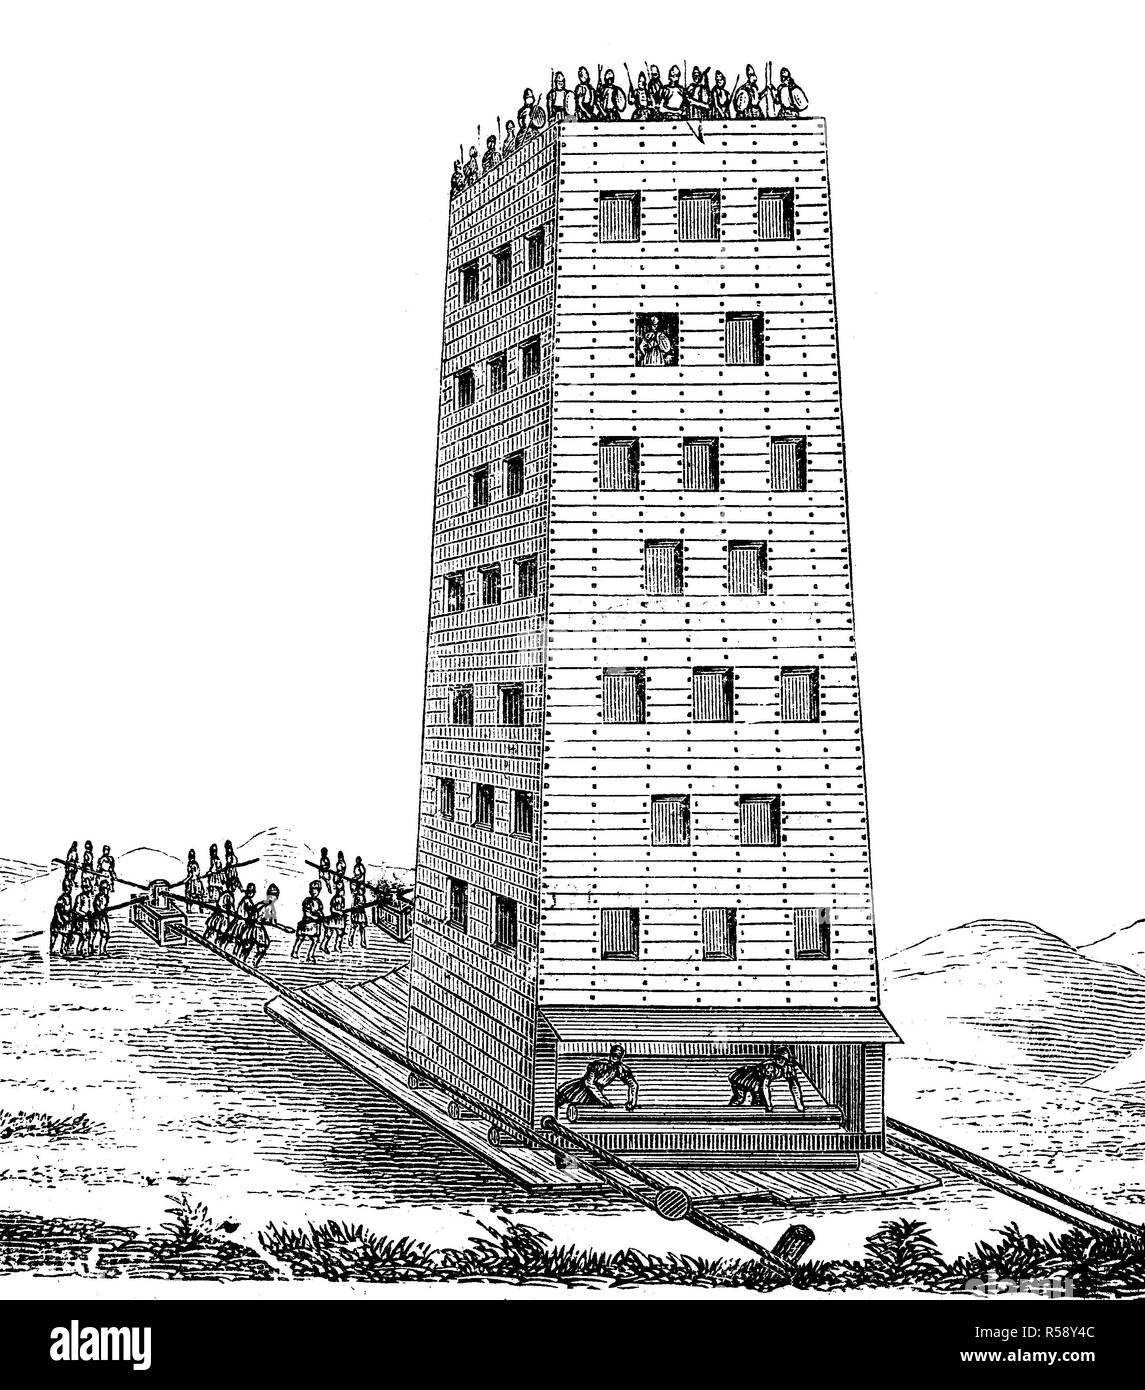 Digital improved reproduction, siege tower or breaching tower or siege engine from the time of the second crusade, Belagerungsturm, Wandelturm aus dem 2. Kreuzzug, original print from th 19th century Stock Photo